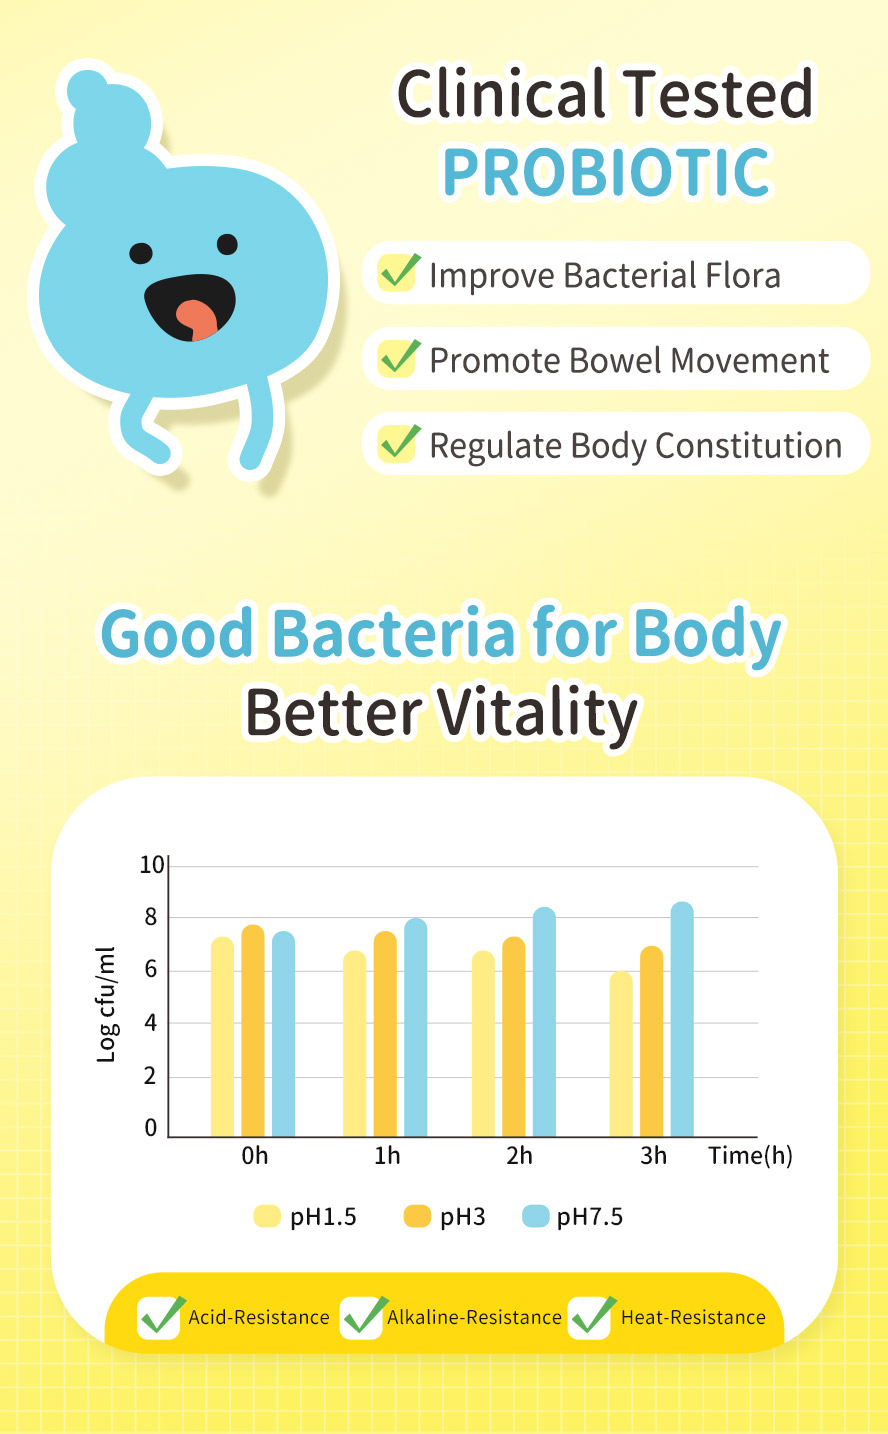 Clinically tested can improve bacterial flora, promote bowel movement, and regulate body constitution for better vitality.